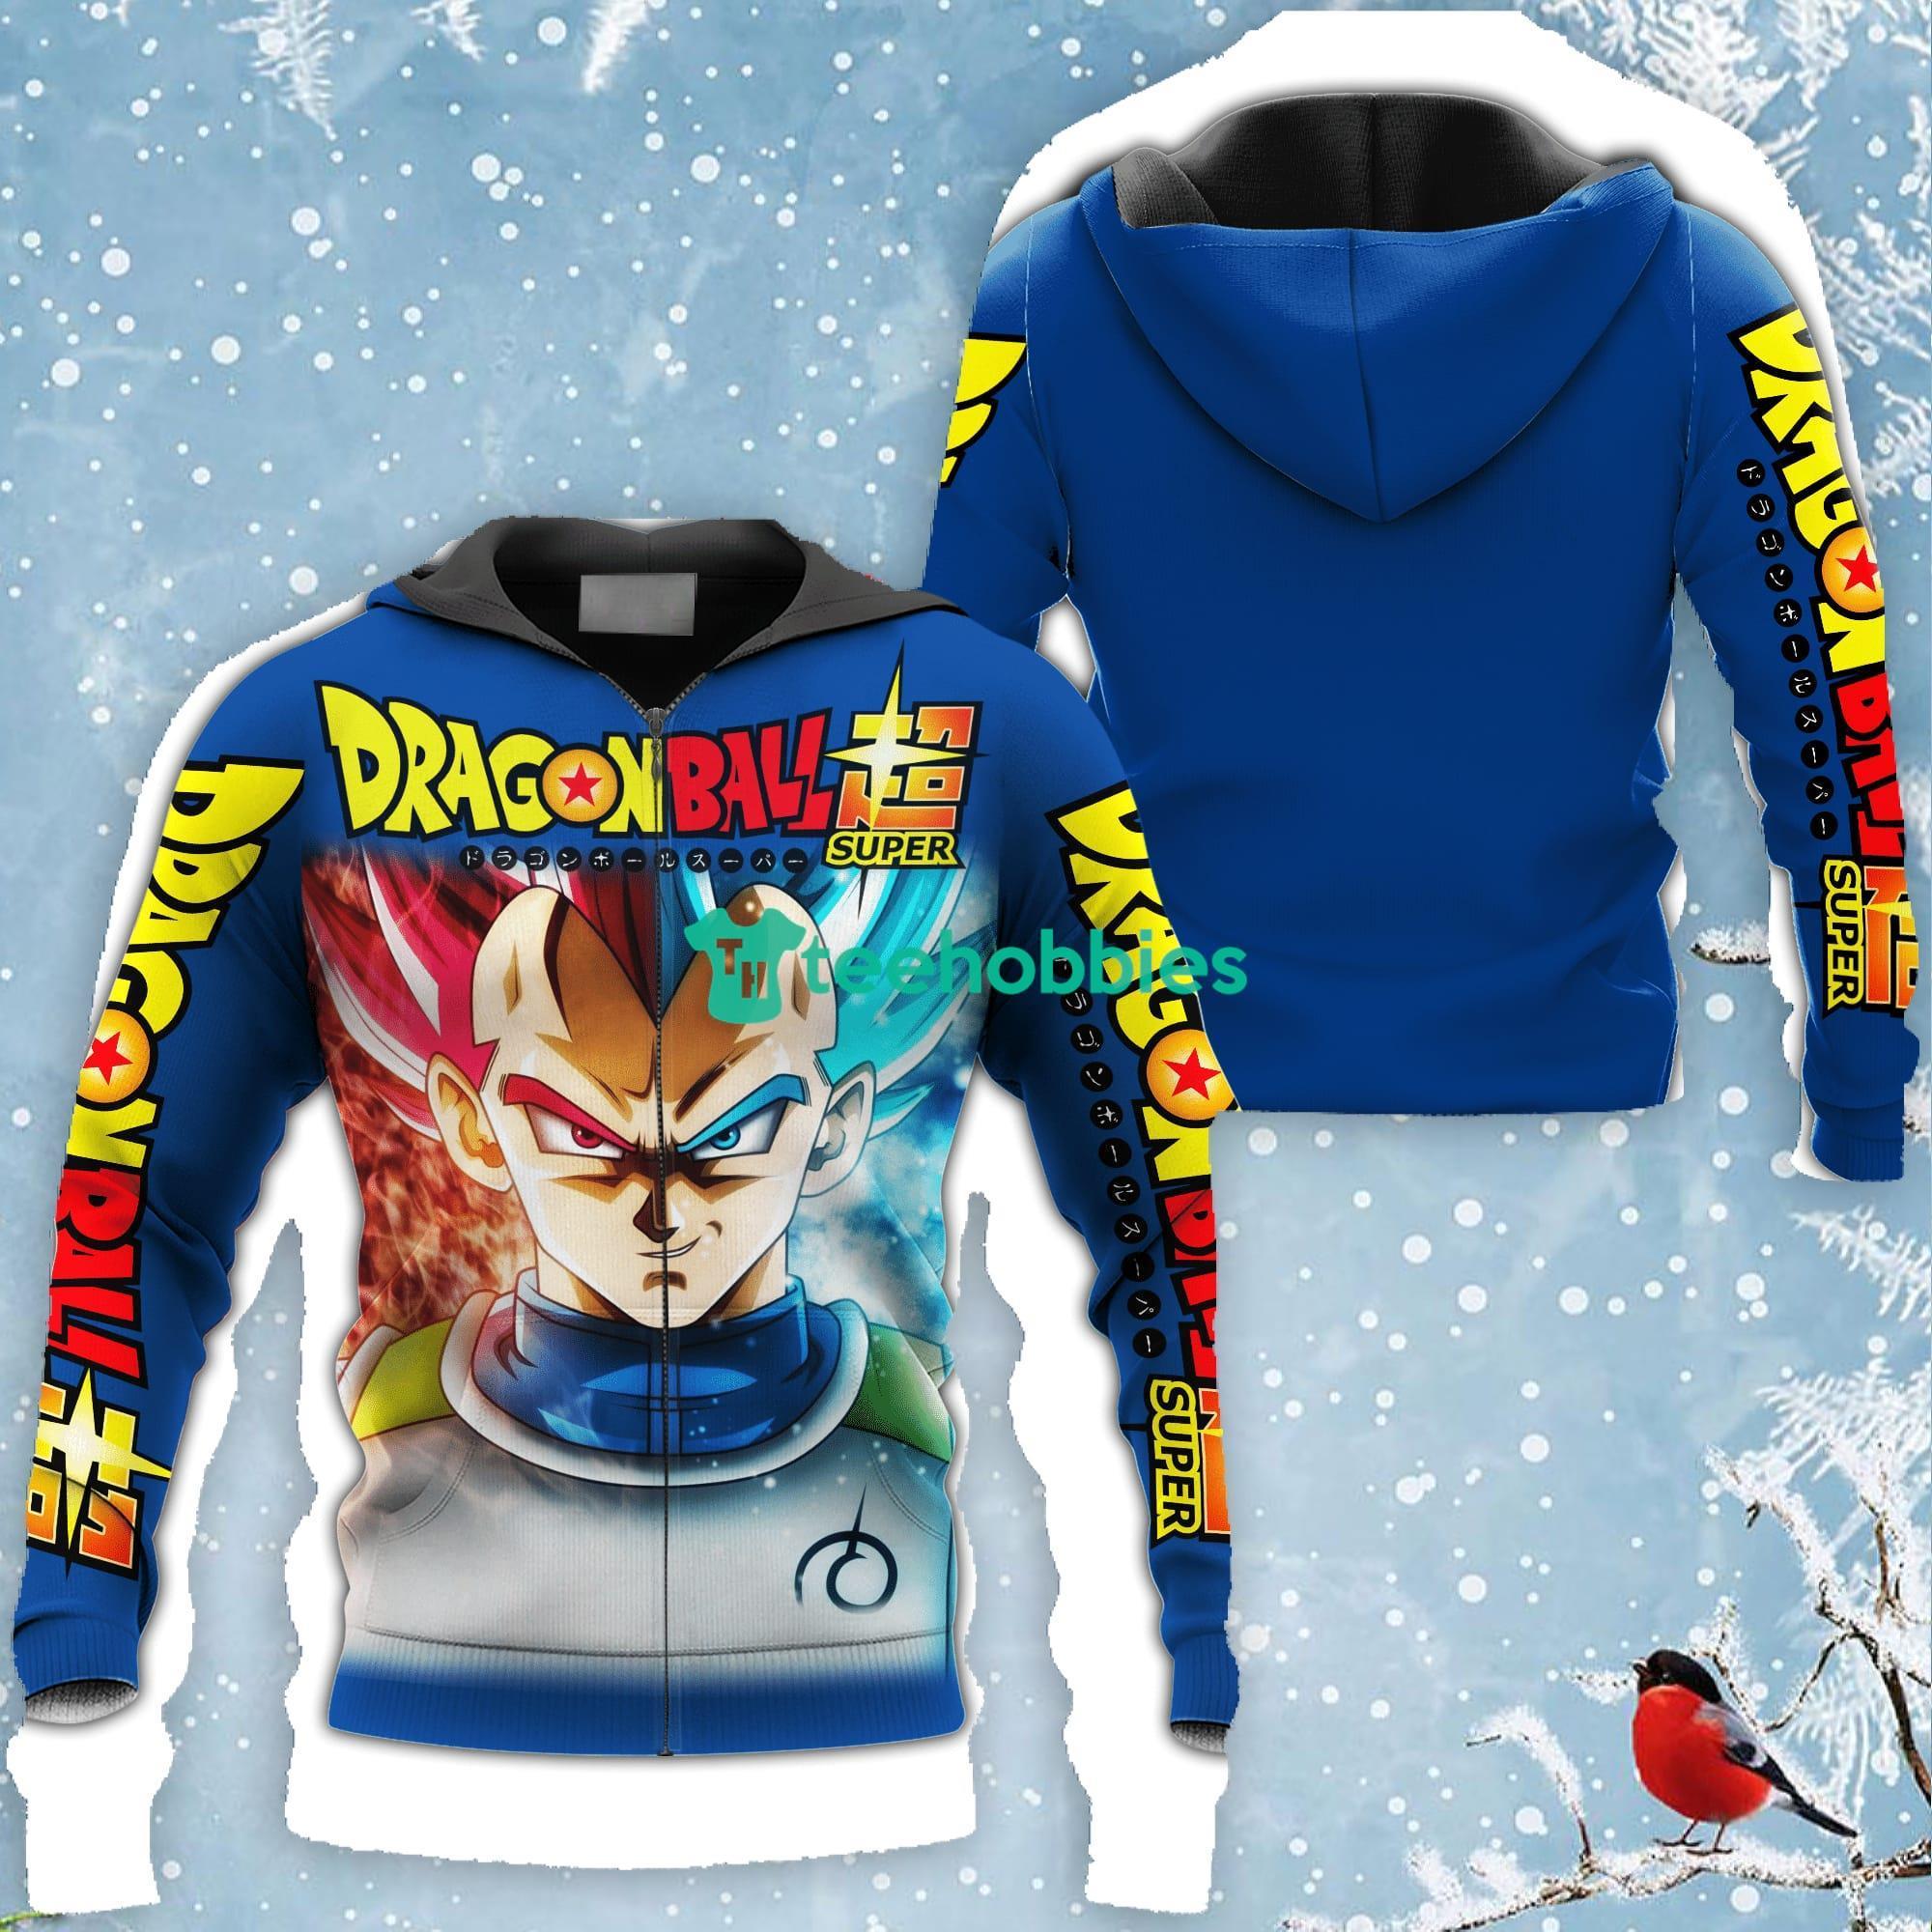 Prince Vegeta Zip All Over Printed 3D Shirt Cosplay Dragon Ball Anime Fans Fan Gift Product Photo 1 Product photo 1